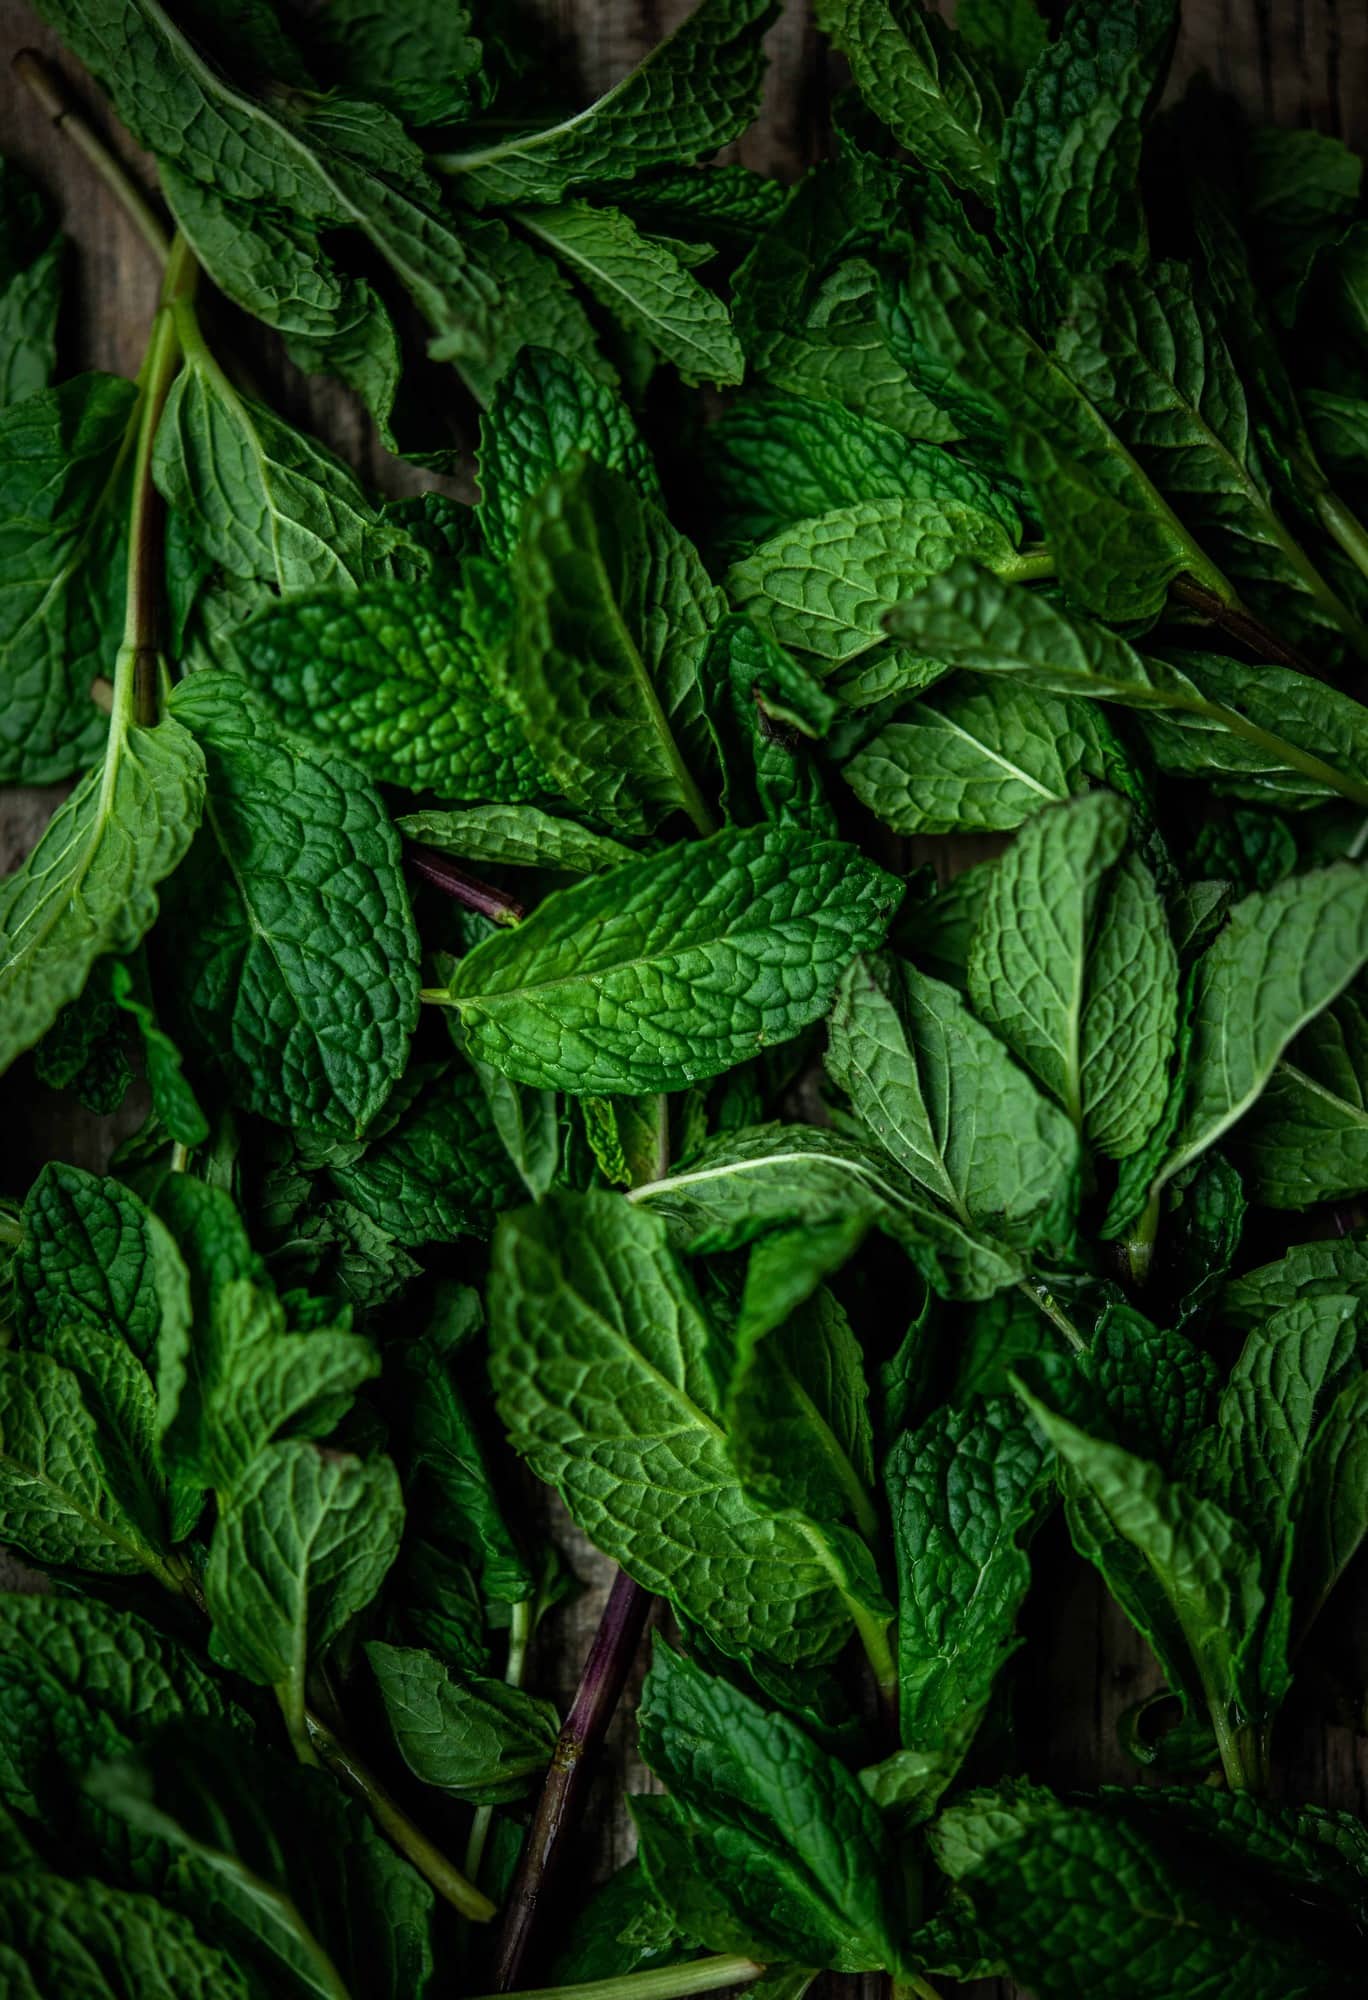 Overhead view of macro photography of fresh mint leaves